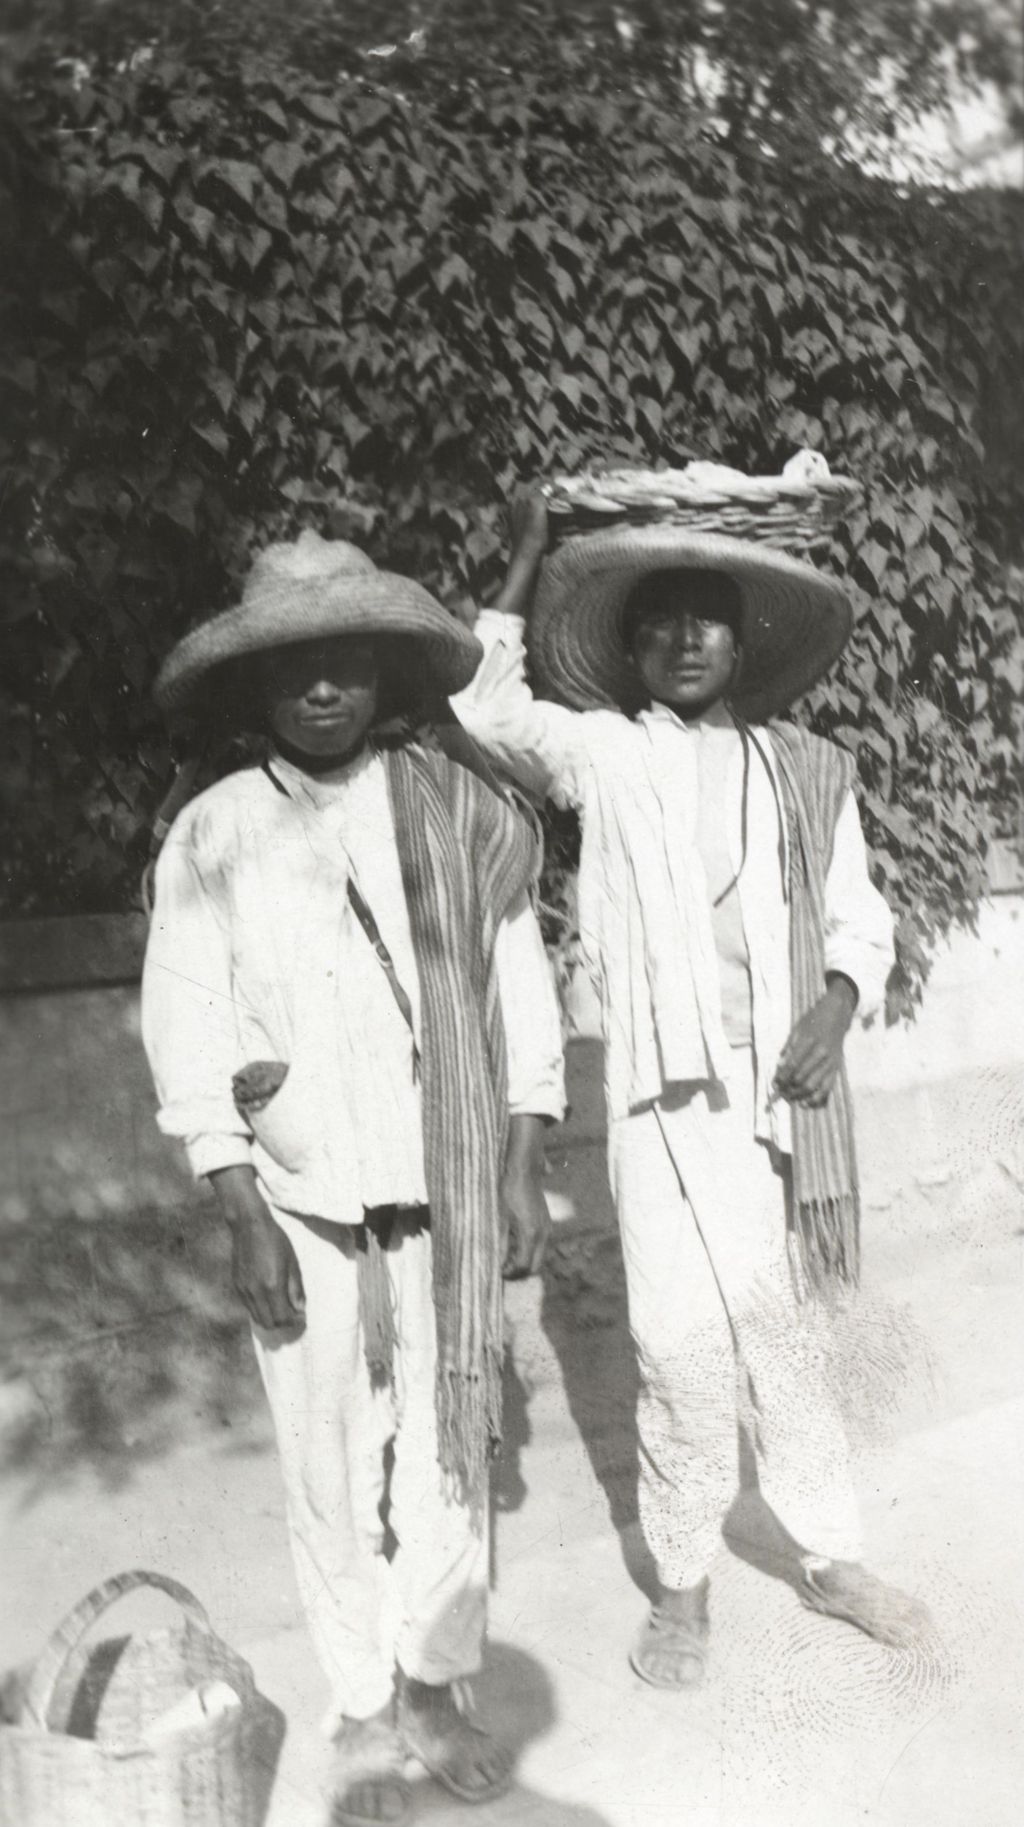 Miniature of Two Mexican men with baskets photographed on Jane Addams' trip to Mexico